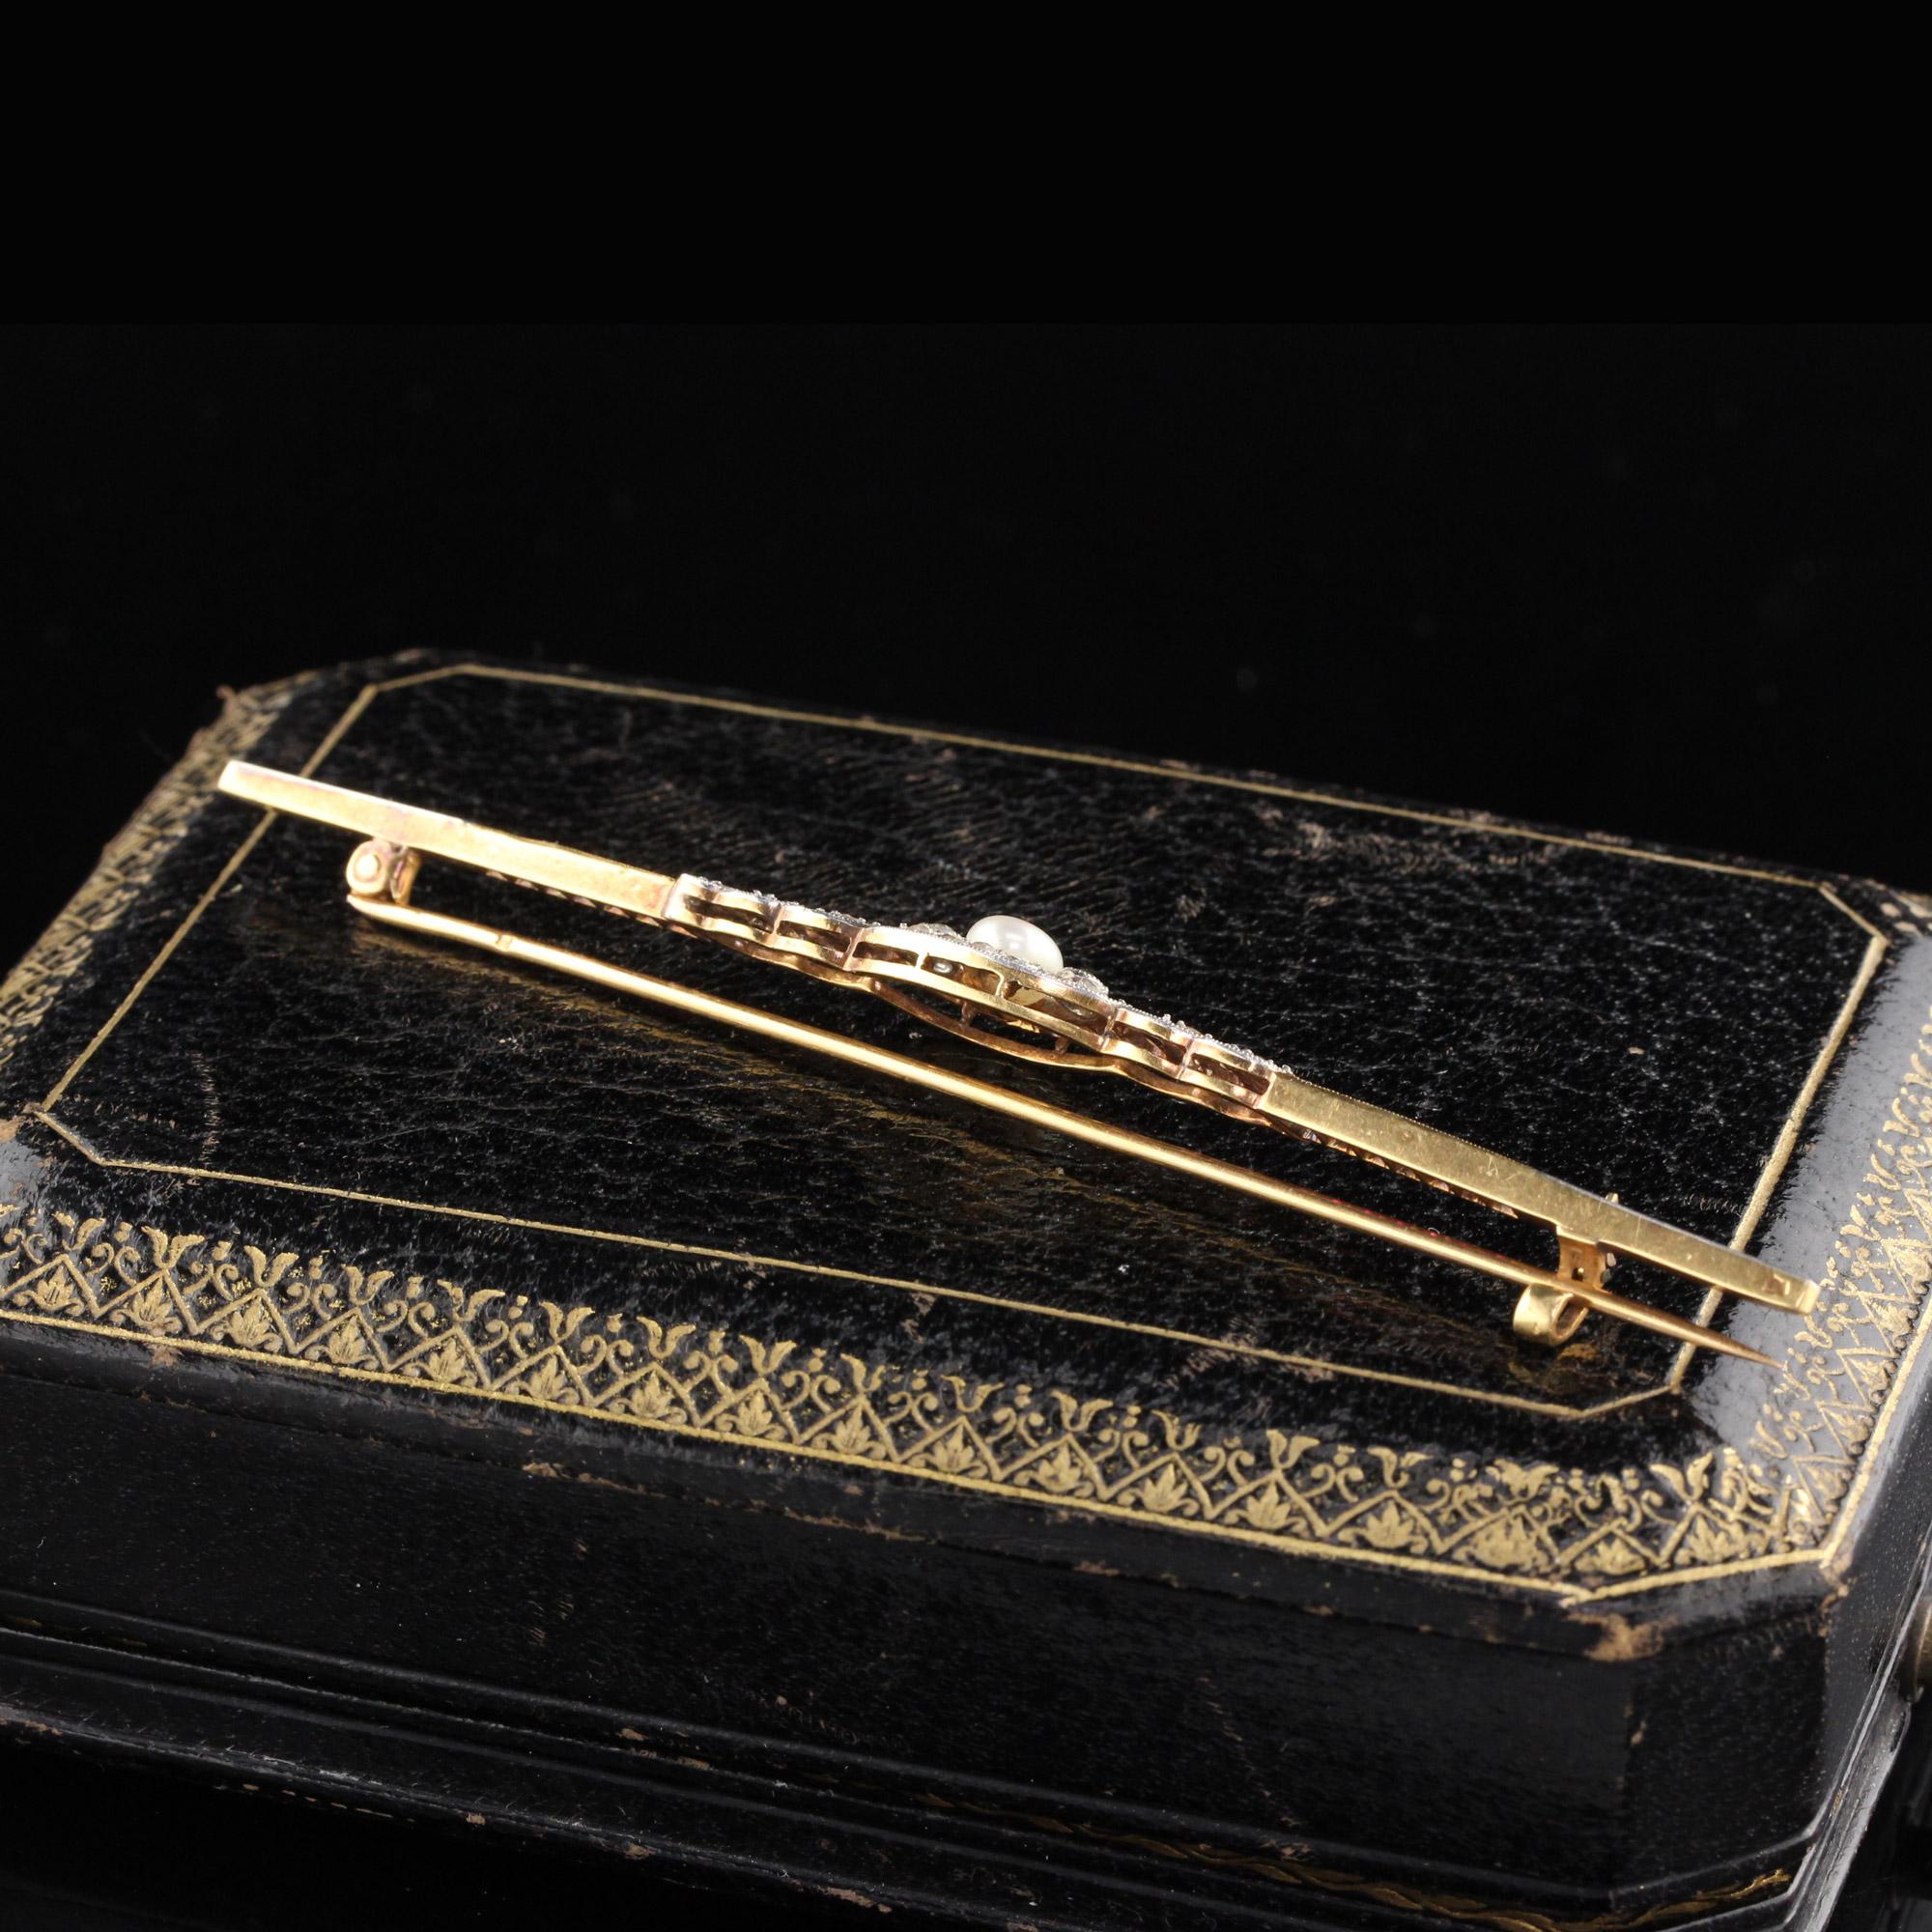 A gorgeous Edwardian bar brooch in excellent condition. Features rubies, rose cut diamonds and a pearl in the center.

Metal: 18K Yellow Gold and Platinum Top

Weight: 6.7 Grams

Diamond Weight: Approximately 0.35 cts

Diamond Color: I

Diamond